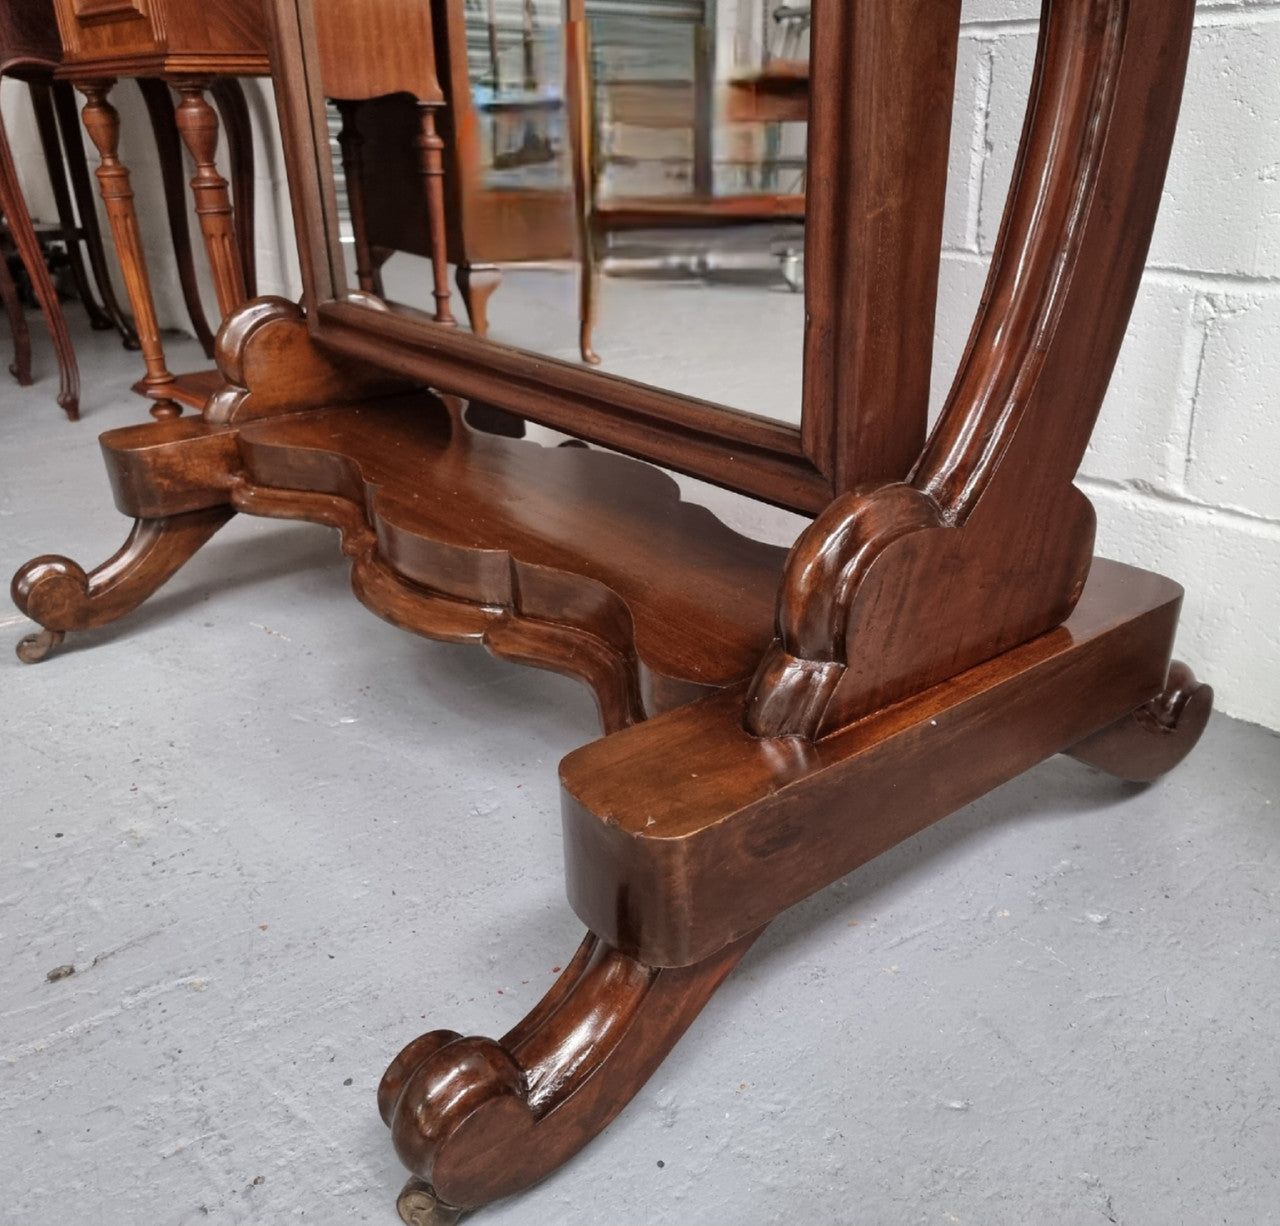 Antique Victorian 19th Century full length Mahogany cheval mirror. Mirror supported on two elegant scrolled upright support and stands on moulded base with four scrolled feet and castors.